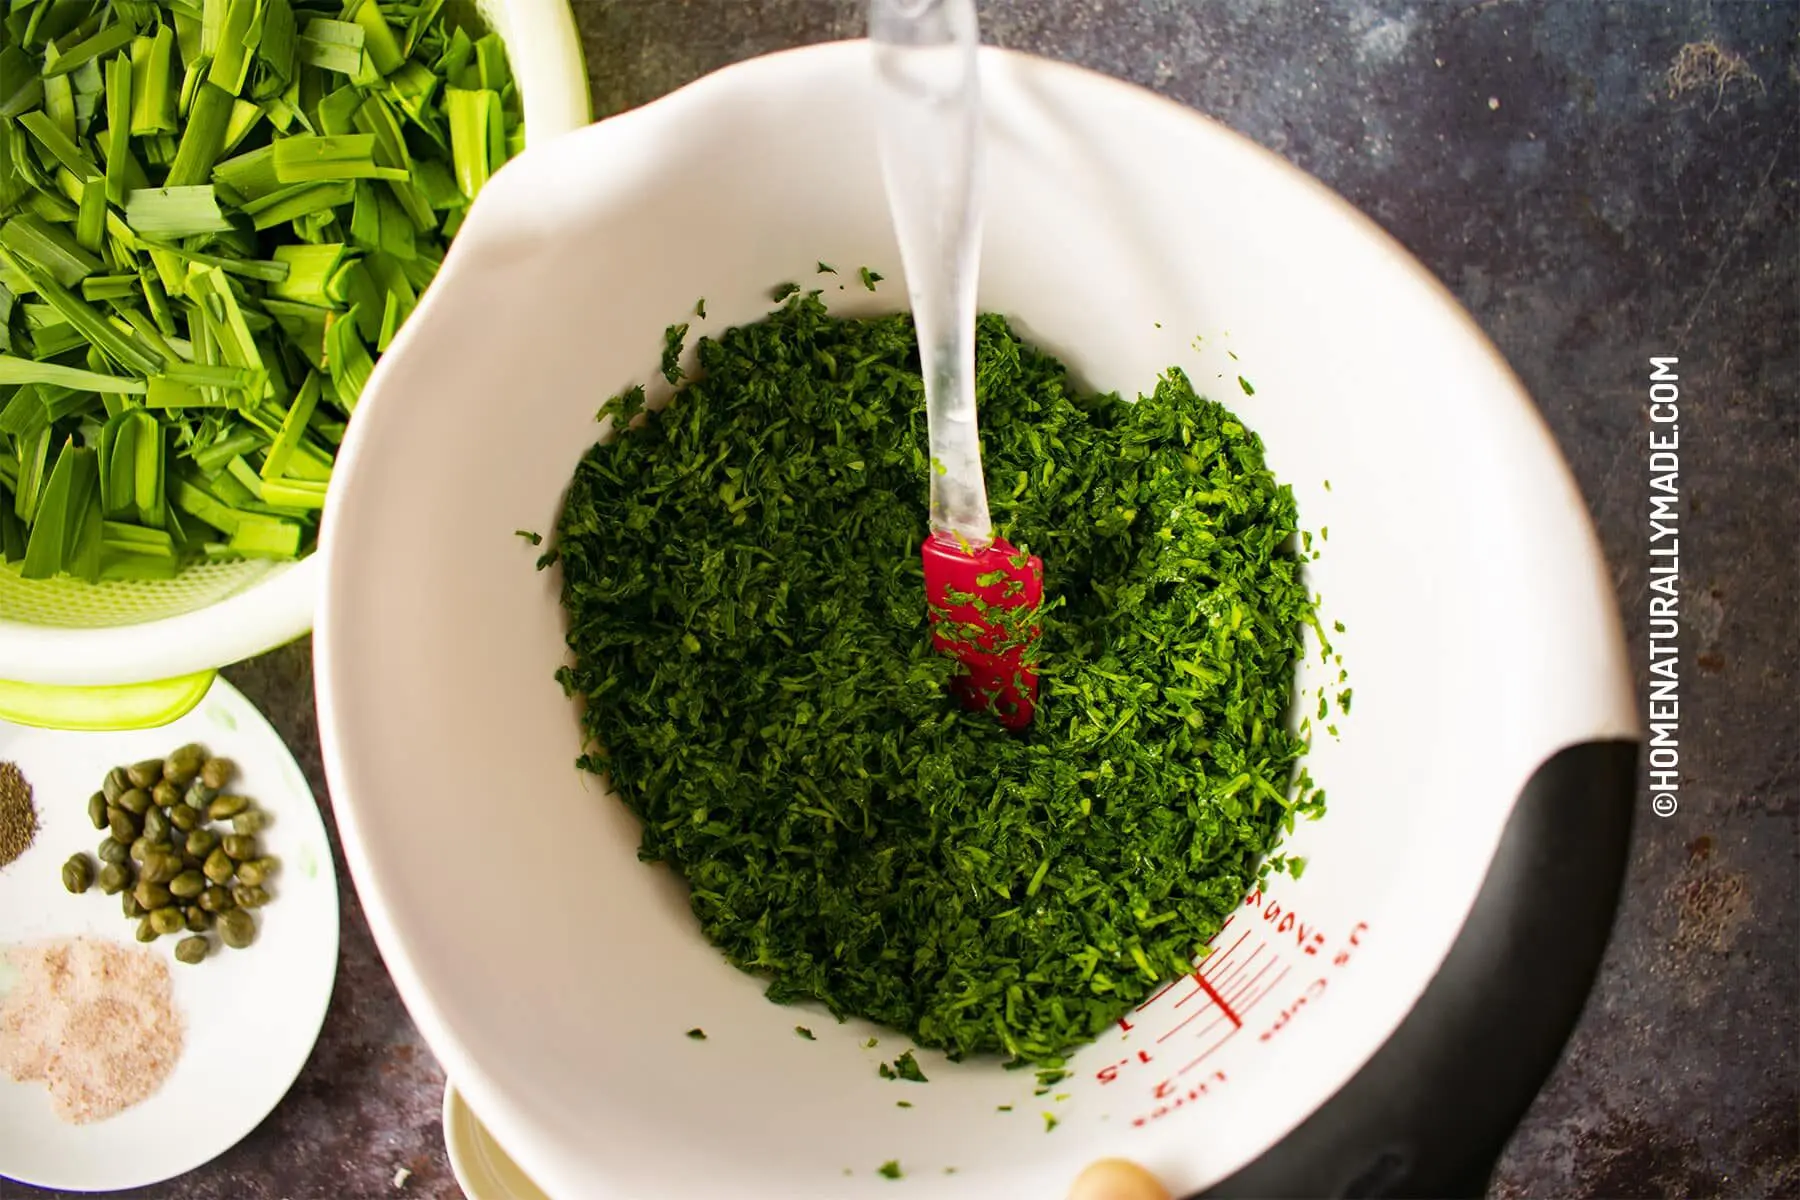 Finely chopped parsley and leek greens